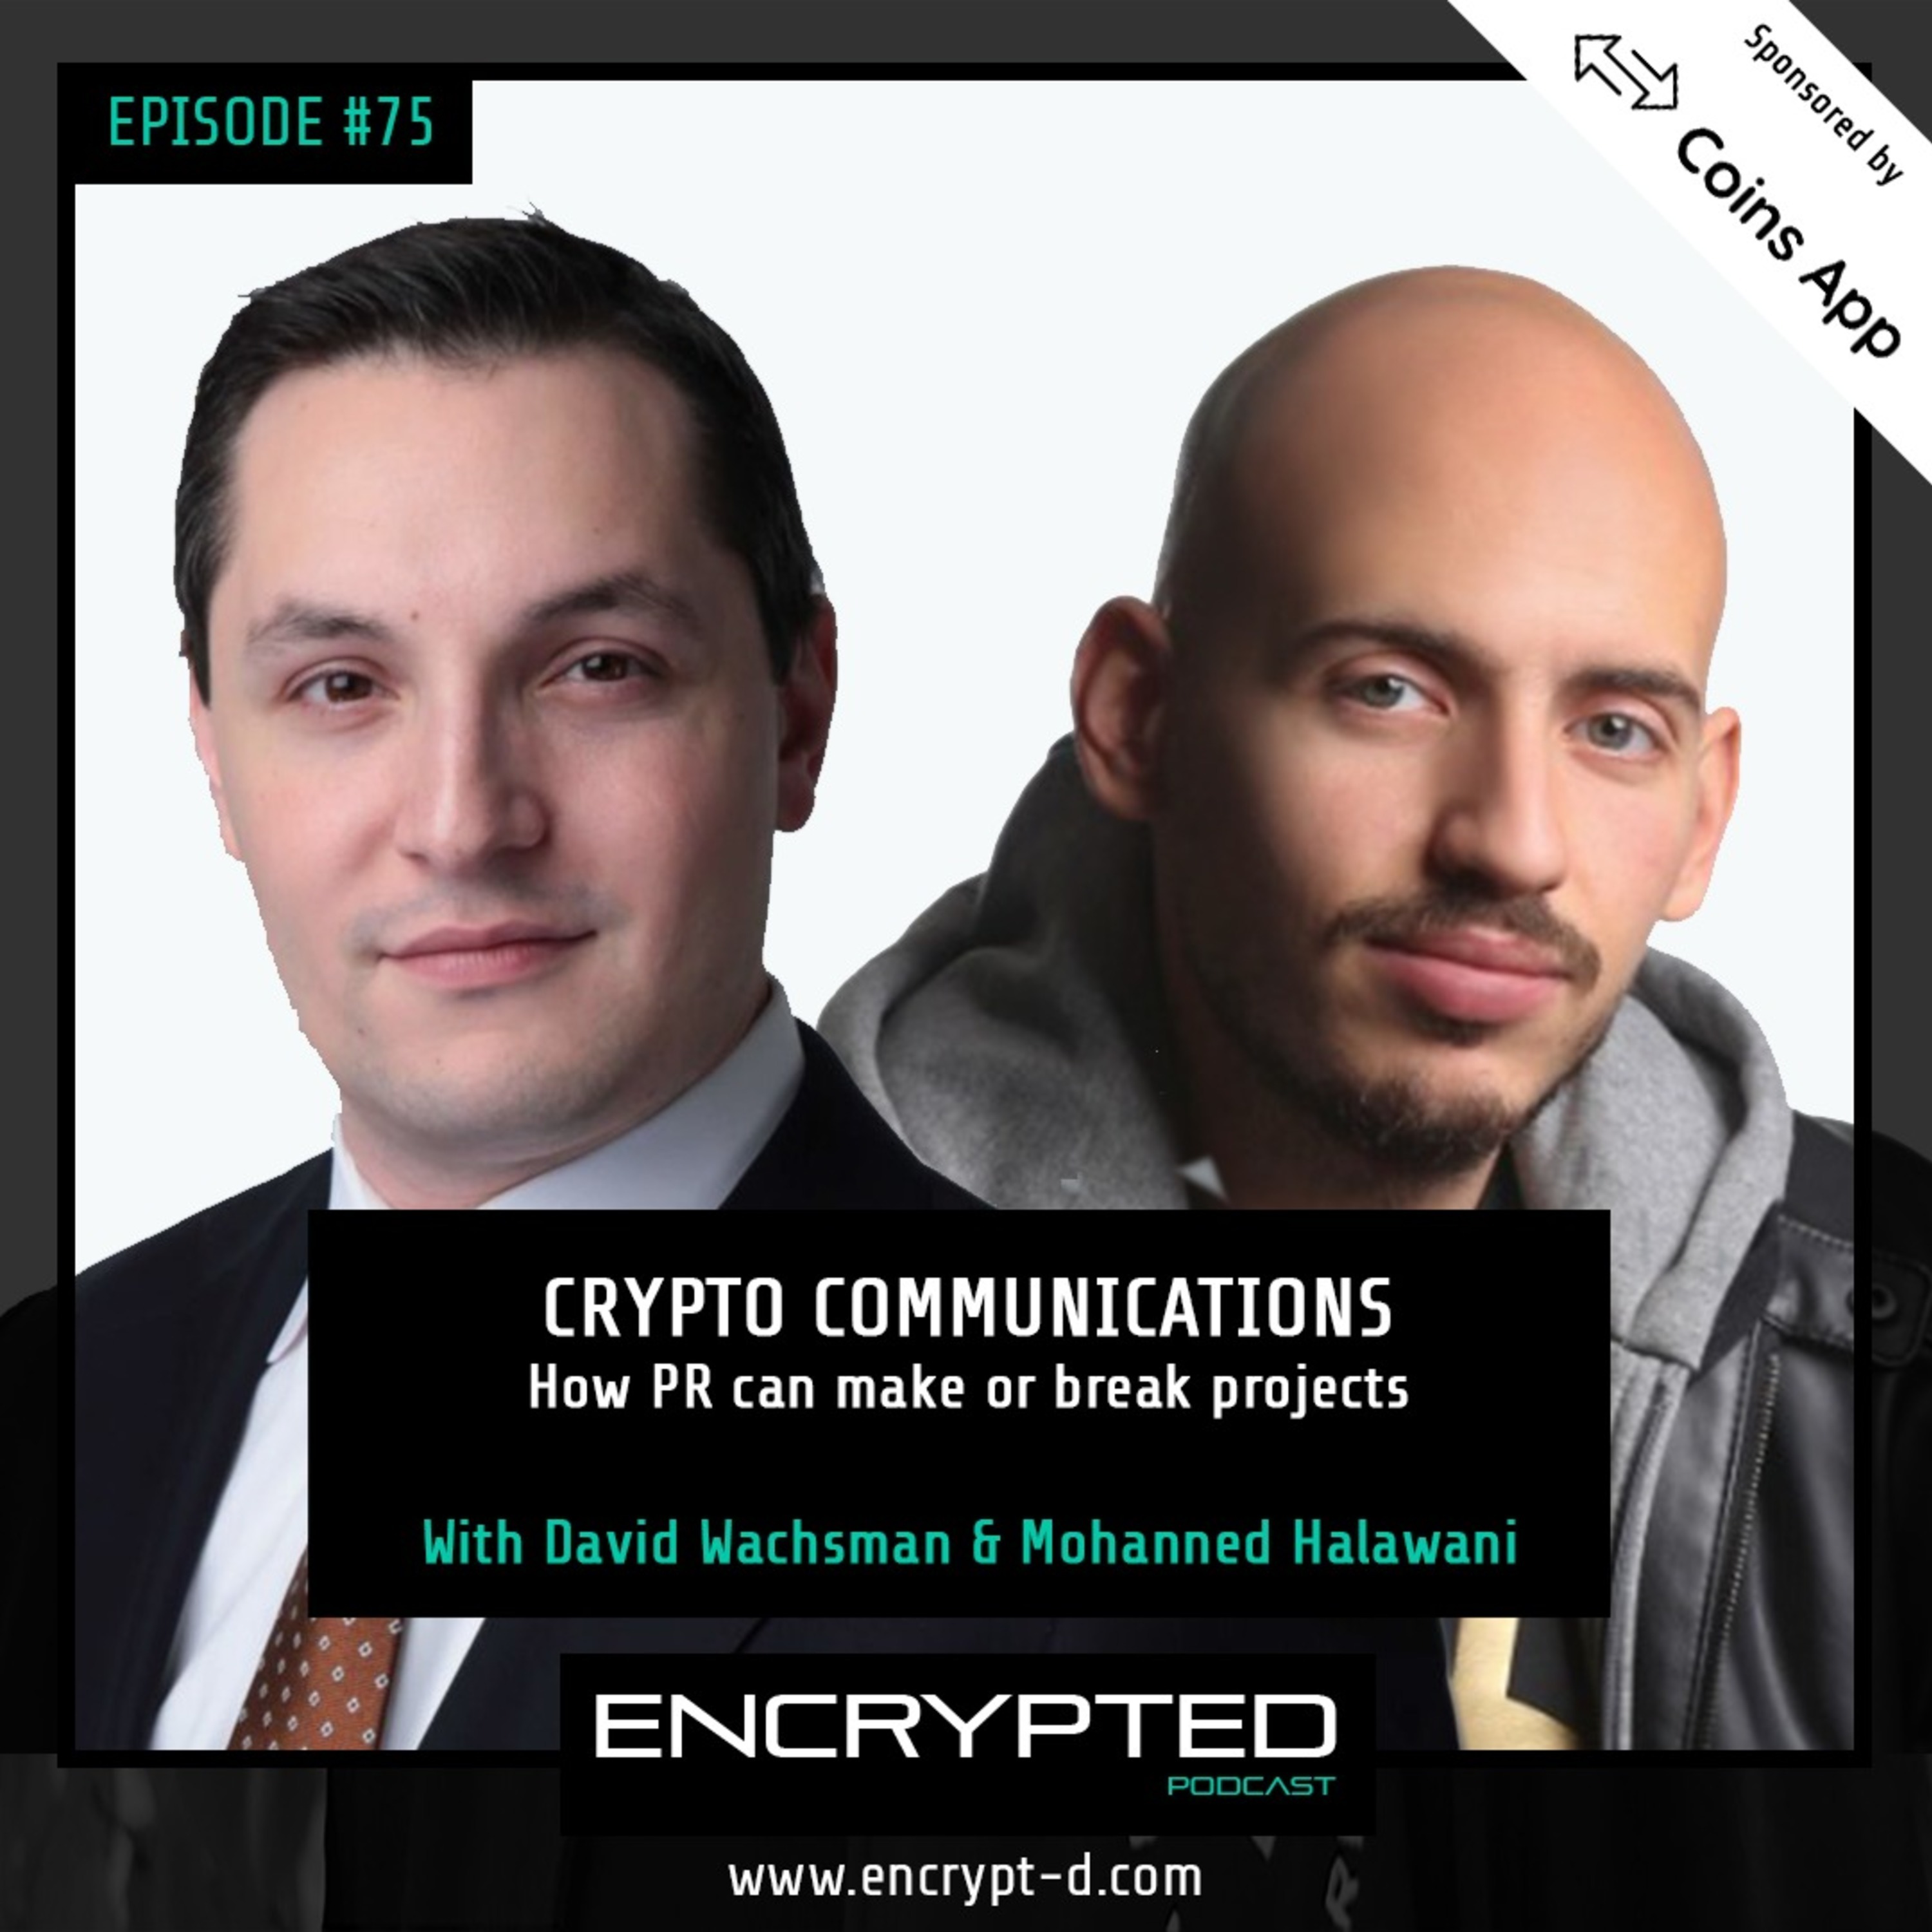 #Ep. 75: Crypto Communications - How PR can make or break projects